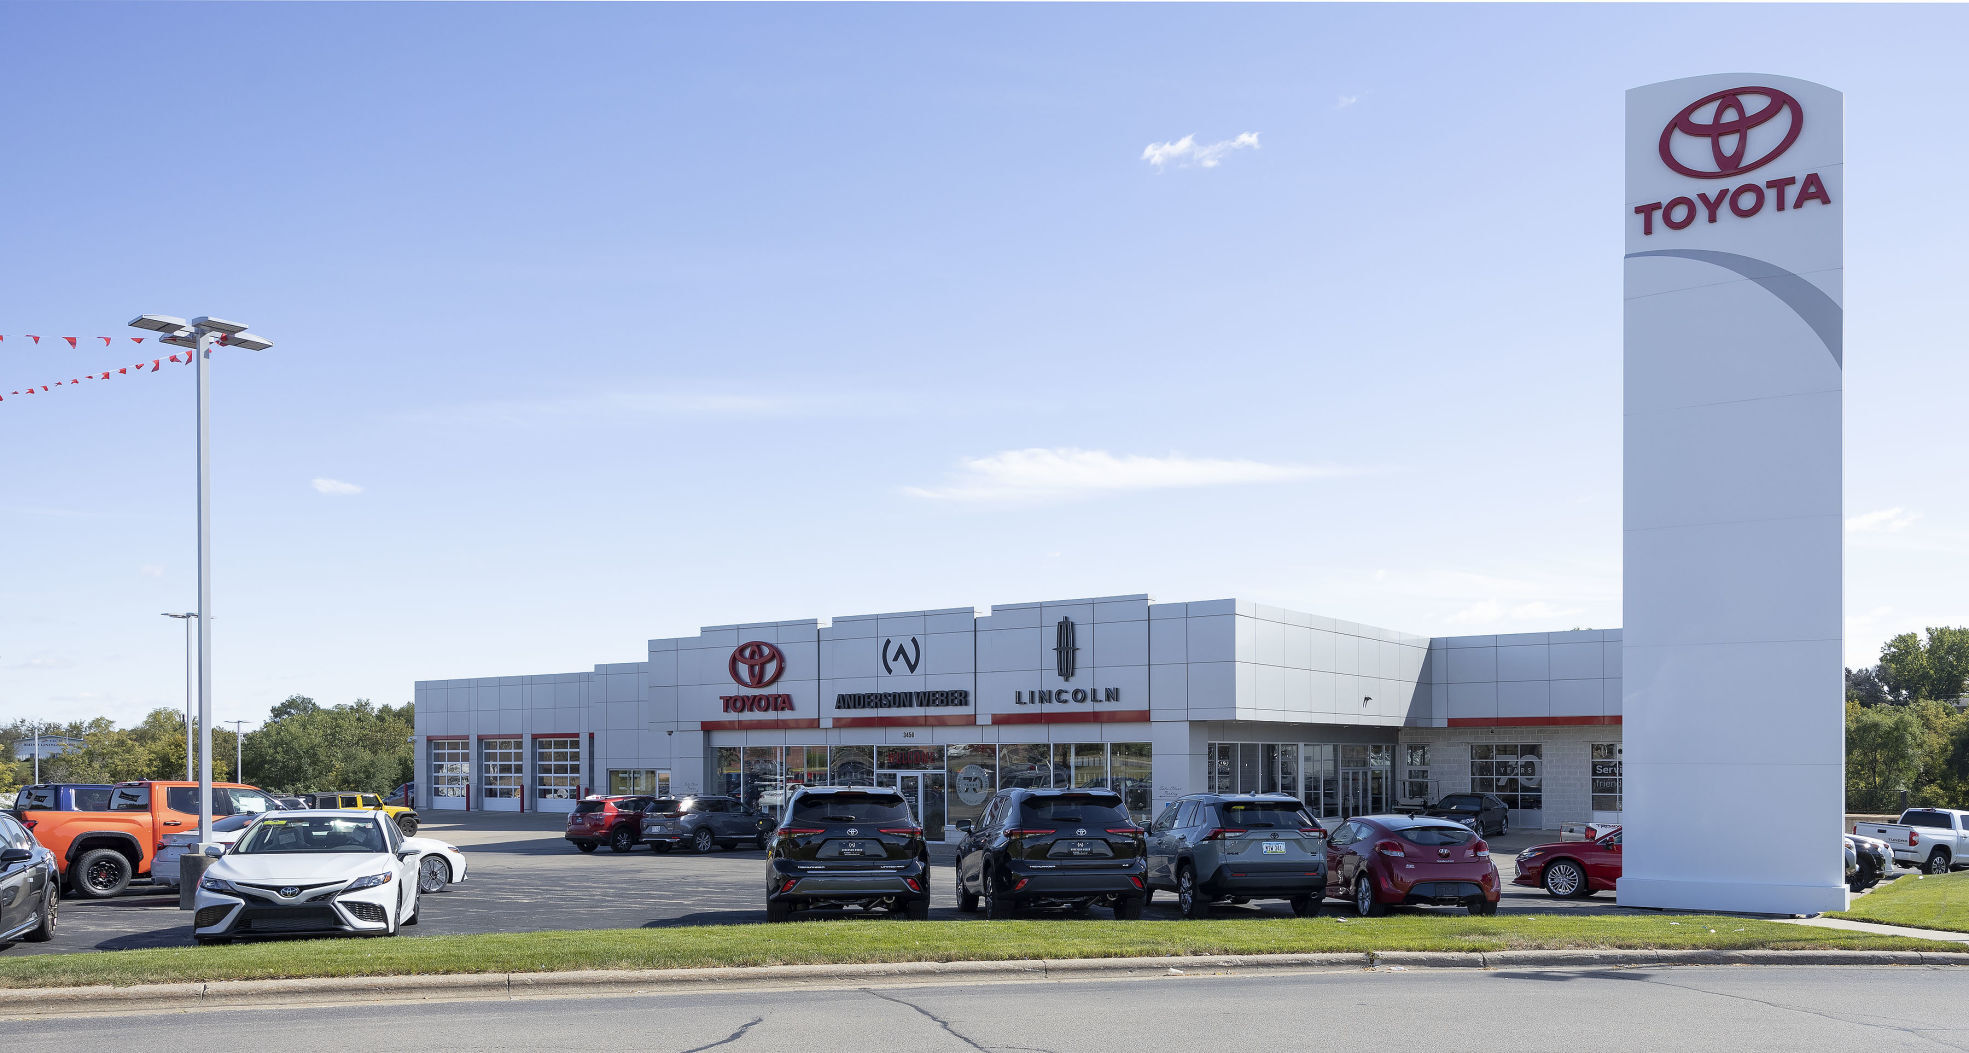 Anderson-Weber Toyota in Dubuque is celebrating its 70th anniversary this month.    PHOTO CREDIT: Stephen Gassman